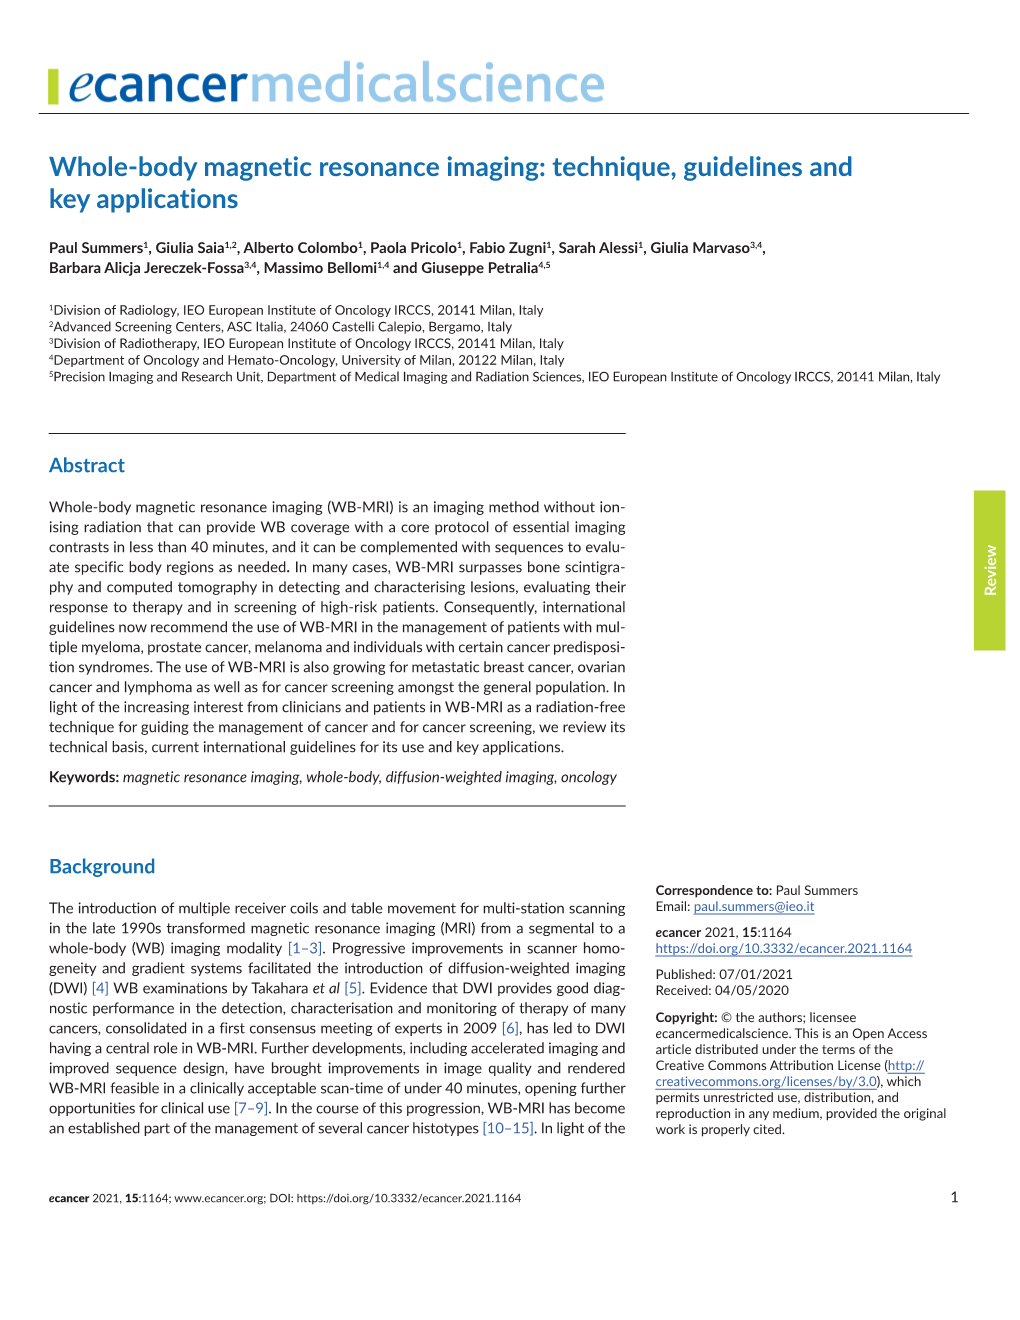 Whole-Body Magnetic Resonance Imaging: Technique, Guidelines and Key Applications